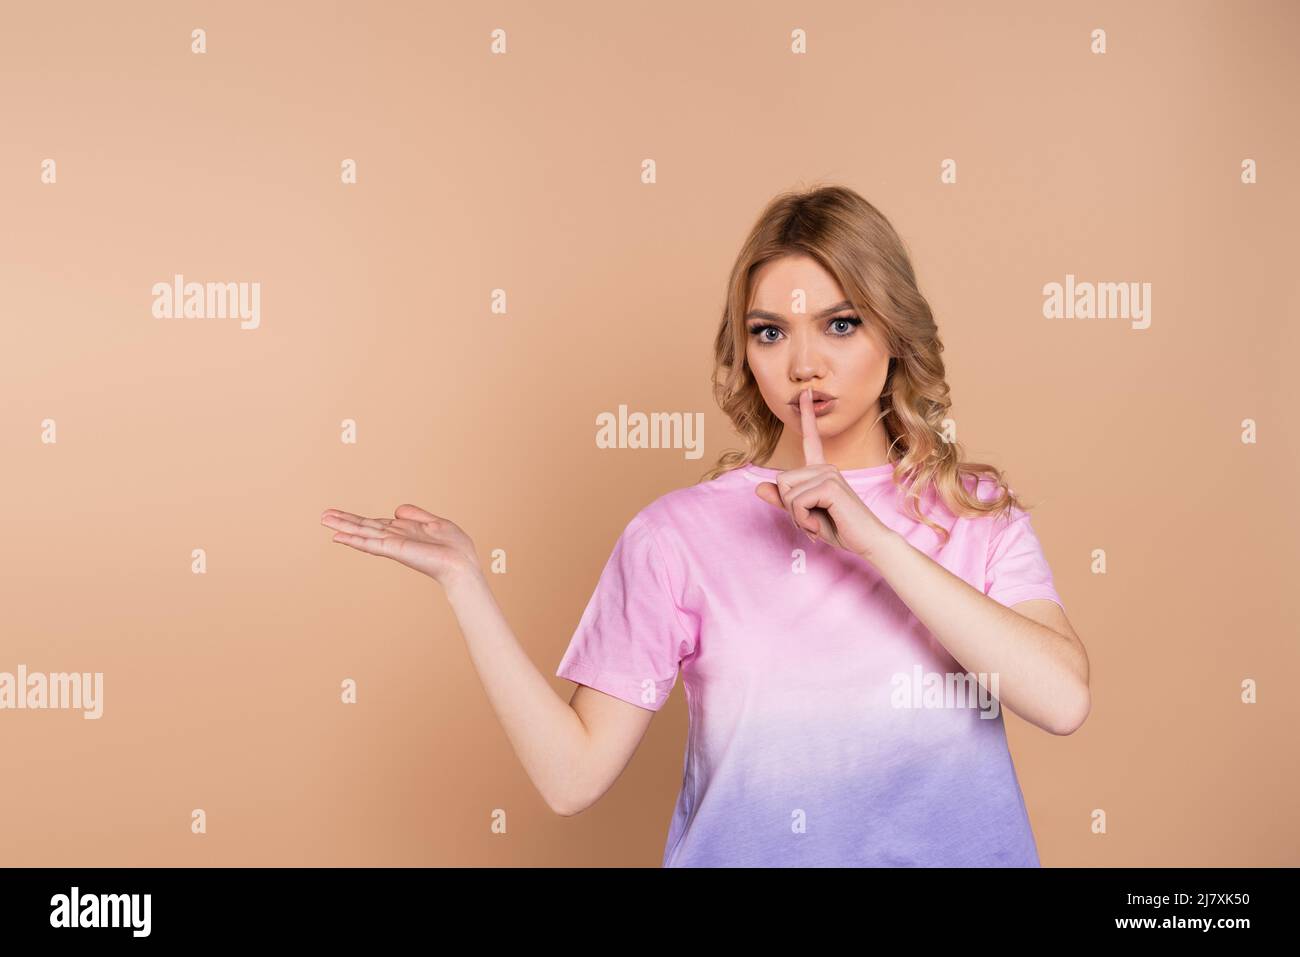 pretty woman showing hush sign and pointing with hand isolated on beige Stock Photo